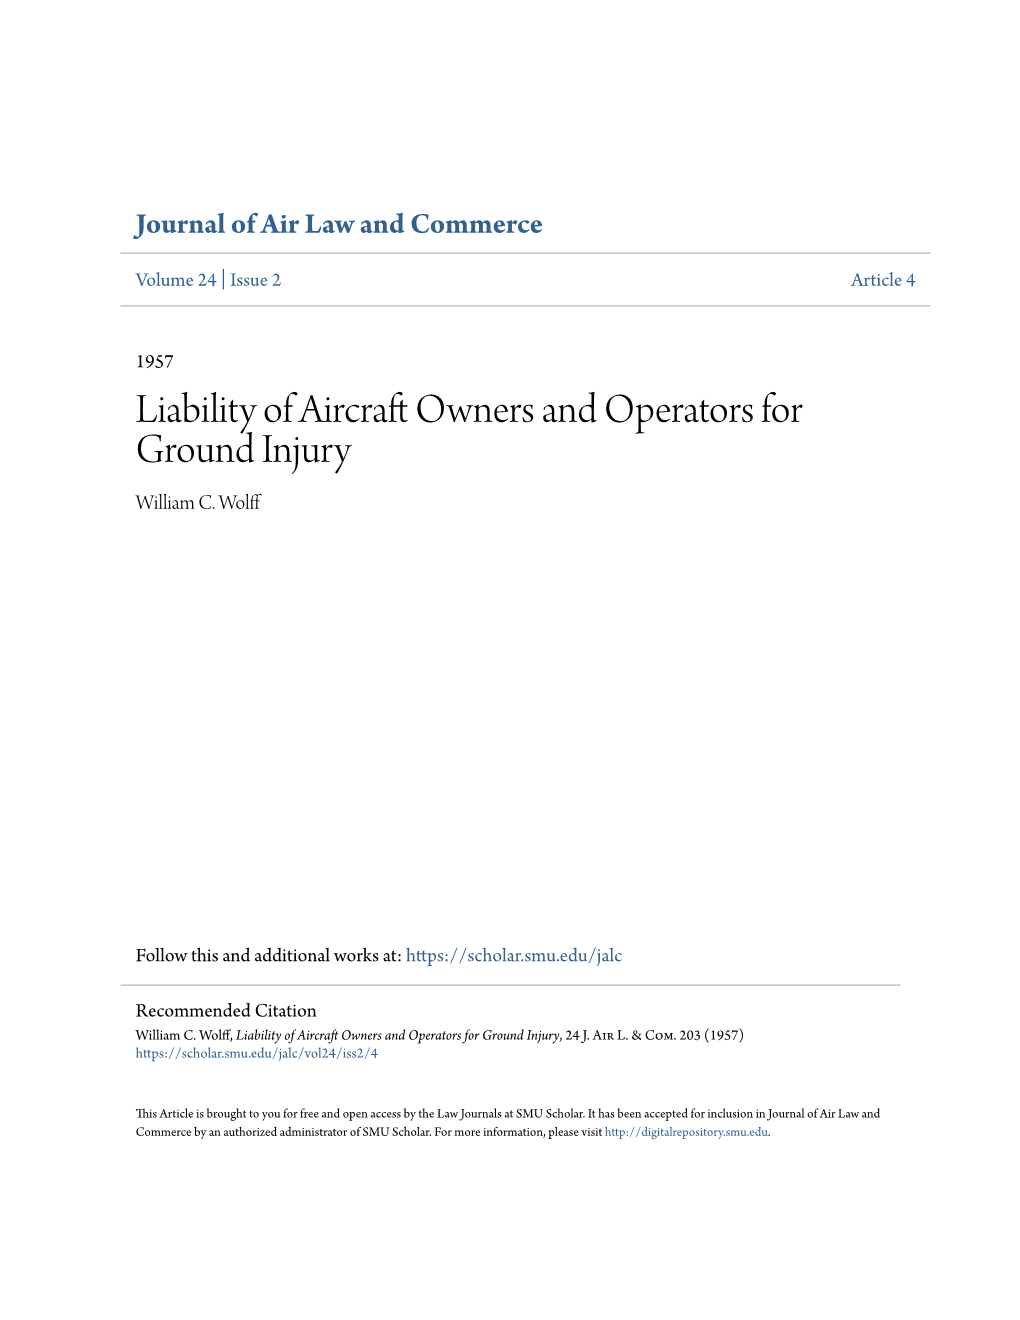 Liability of Aircraft Owners and Operators for Ground Injury William C